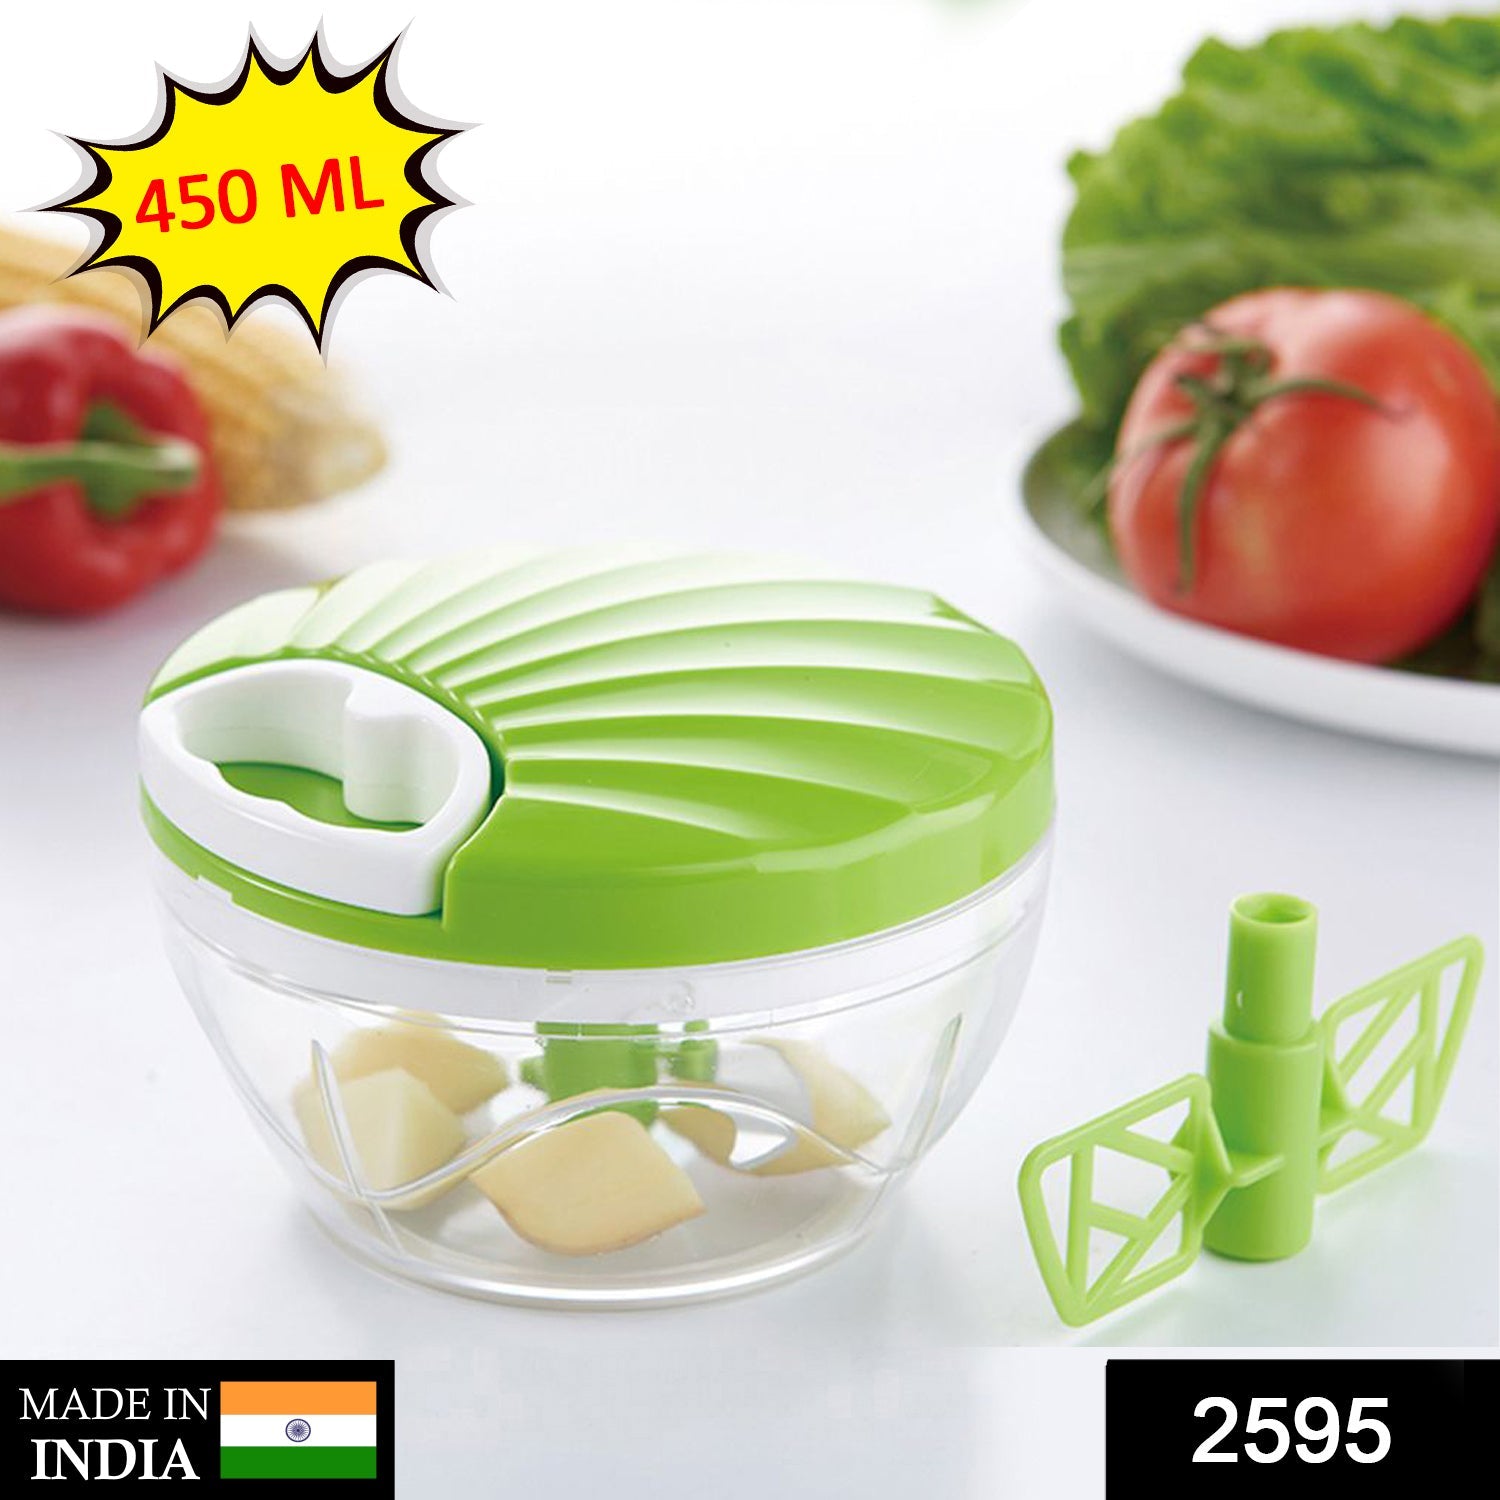 2595 2in1 Speedy Chopper With 450ML Capacity Easy to Chop Vegetable freeshipping - DeoDap